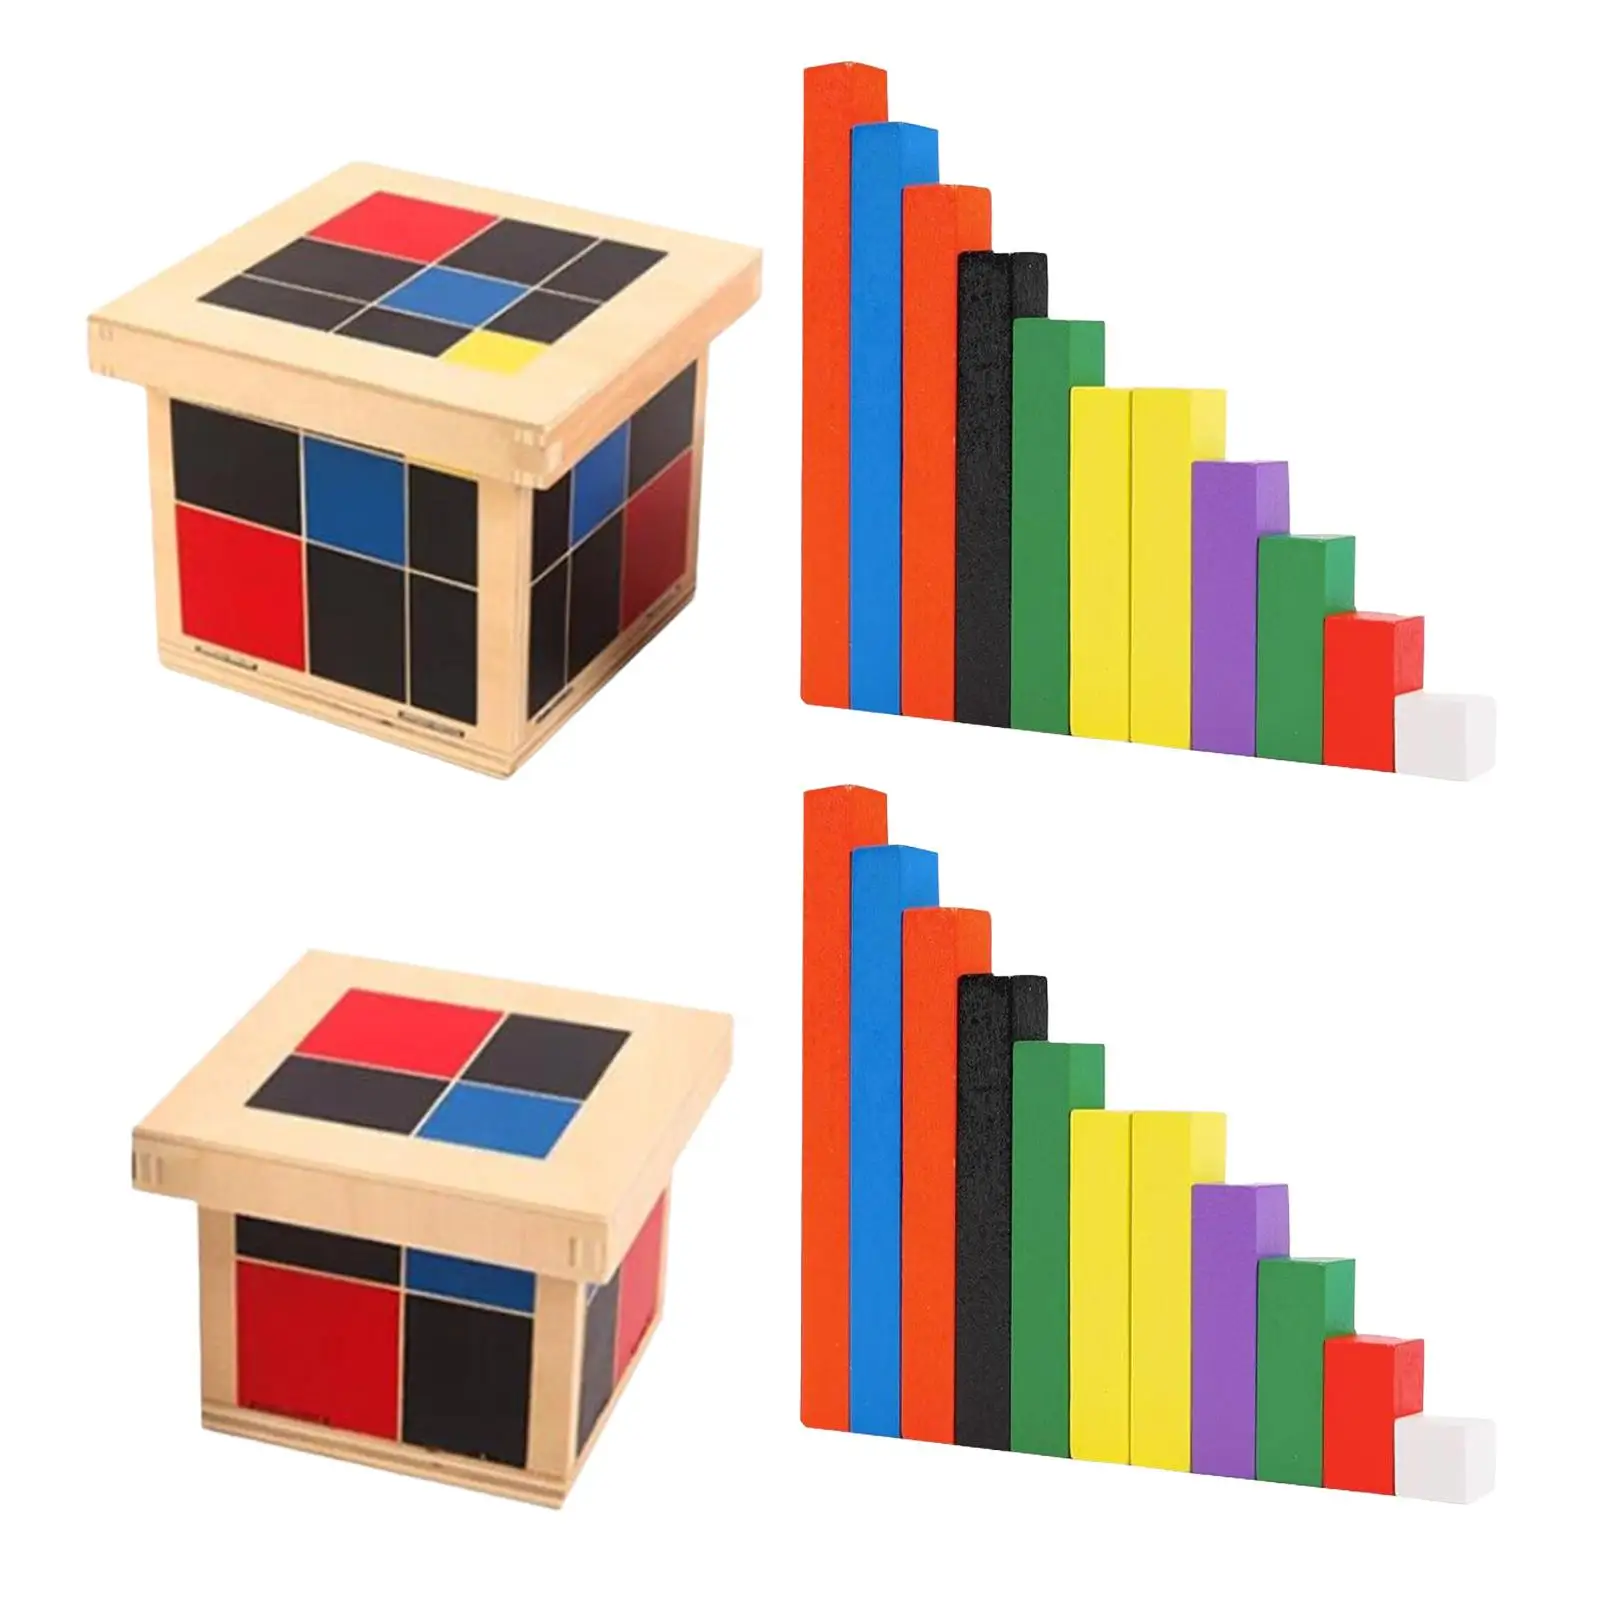 

Wooden Cube Toy Education Toys Montessori Math Materials Preschool Early Learning Tool Toys for Children Boys Girls Baby Kids